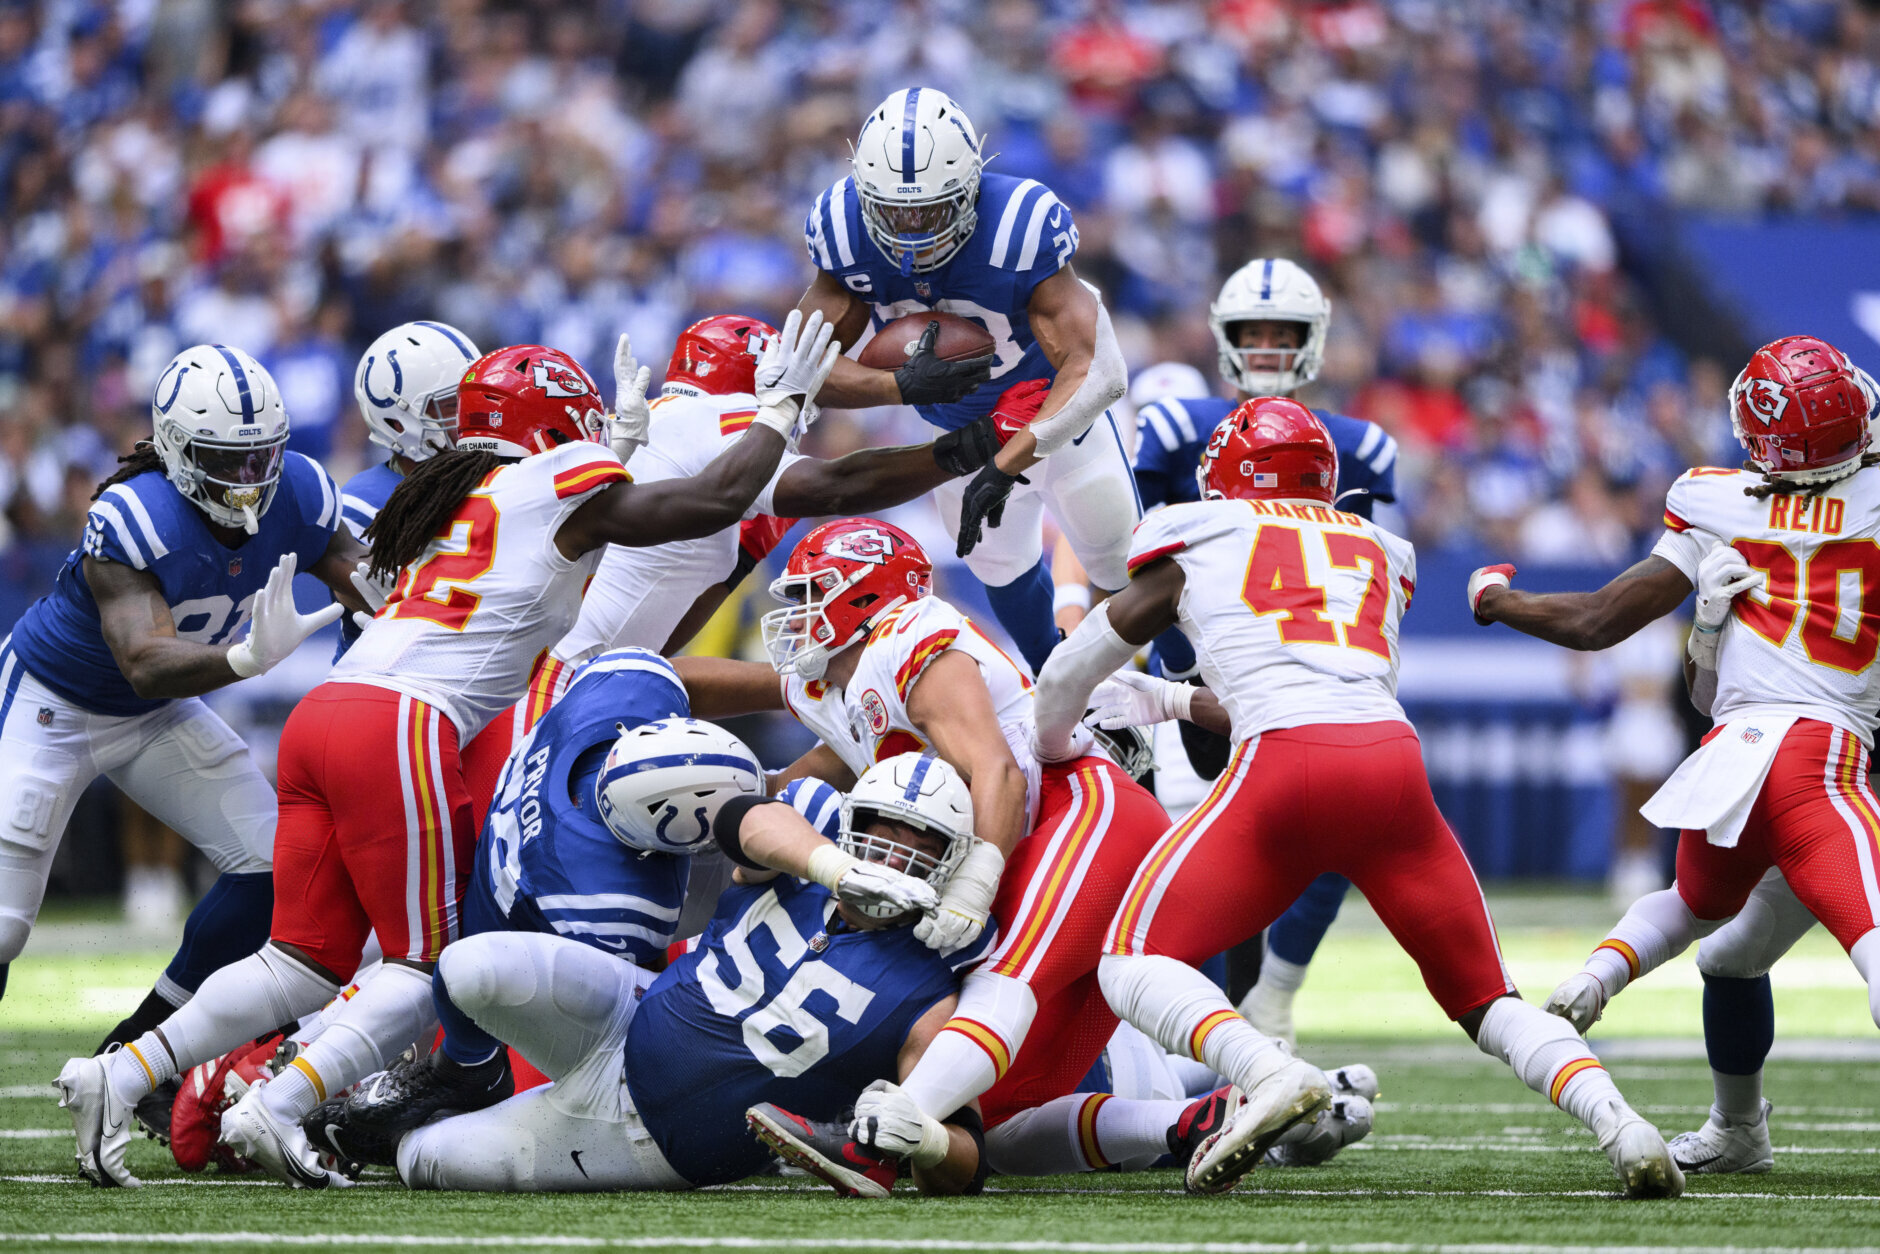 <p><em><strong>Colts 20<br />
Chiefs 17</strong></em></p>
<p>Kansas City did a bunch of fluky stuff because their kicker is hurt and legends like Patrick Mahomes and Travis Kelce missed on plays they normally make in their sleep. Nothing to see here, folks.</p>
